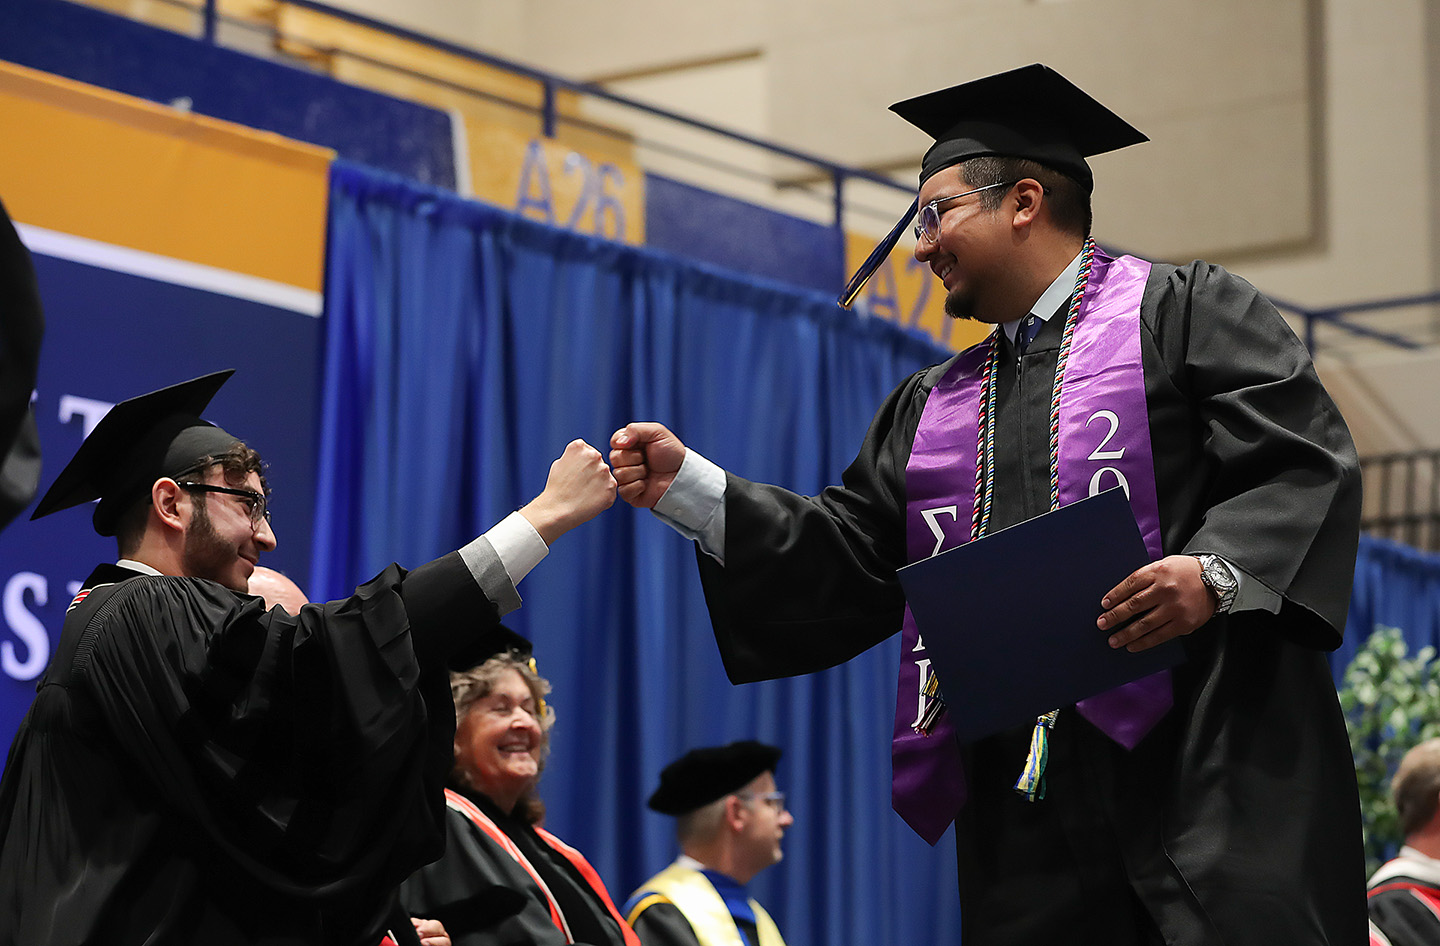 Jose Arredondo, right, graduated from UNK on Friday with a bachelor’s degree in language arts education. He’ll teach 7-12 English at Loup City Public Schools this fall. (Photos by Erika Pritchard, UNK Communications)